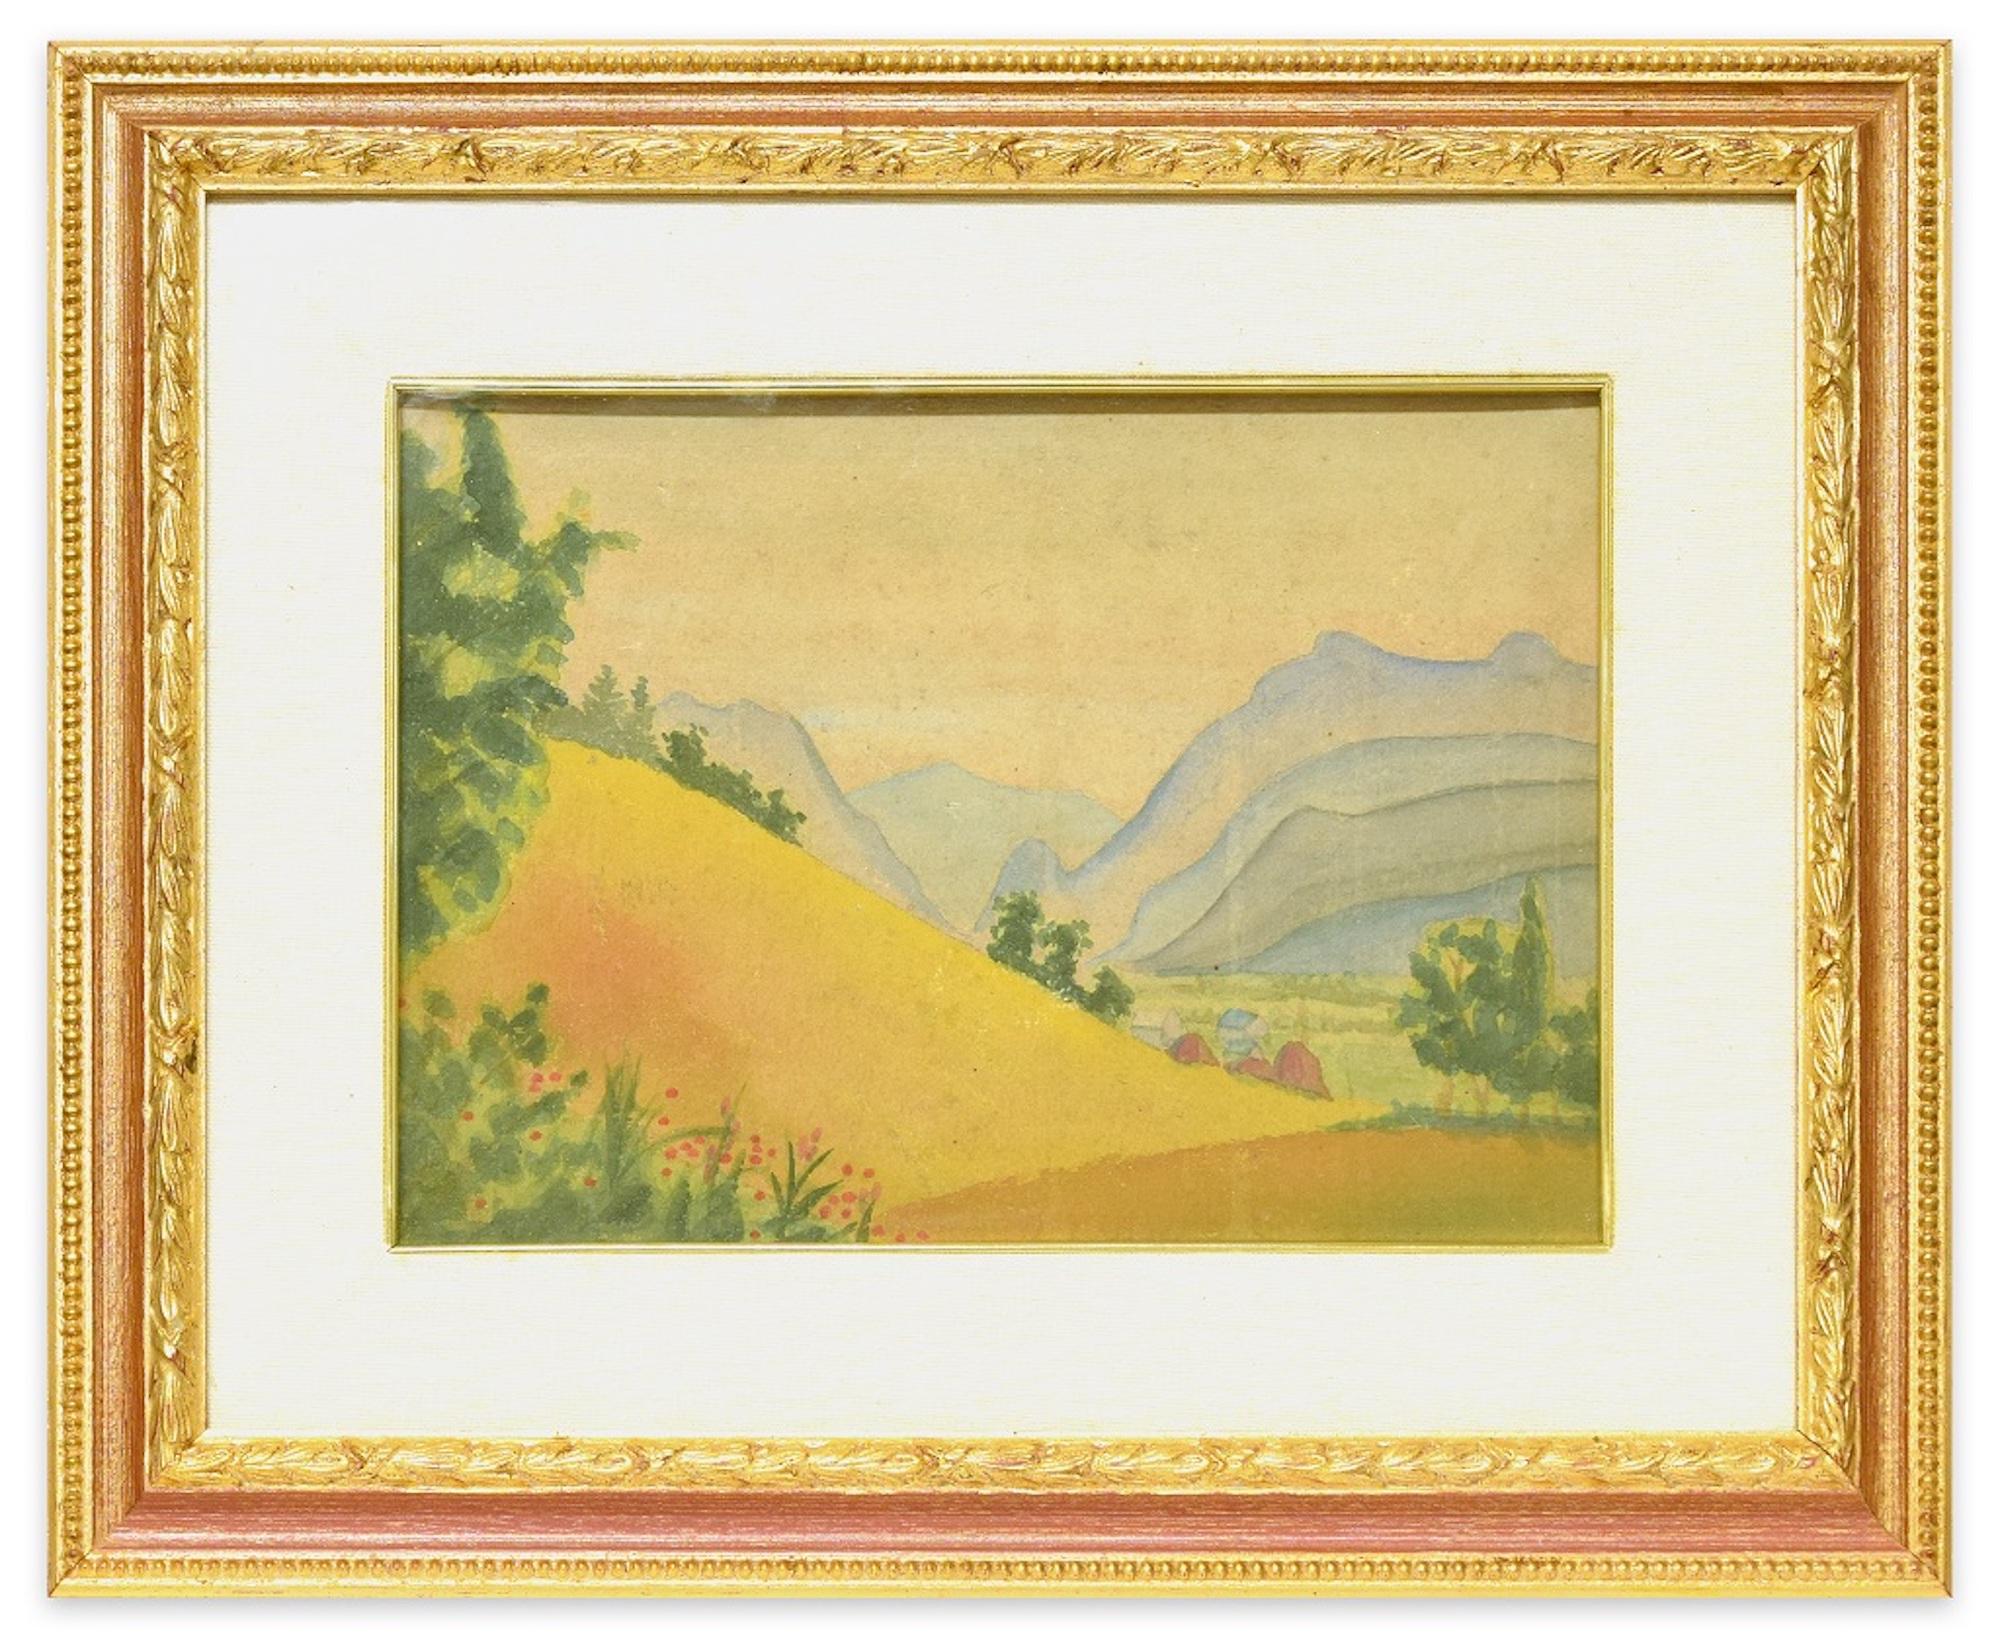 Mountainous Landscape - Original Watercolor on Cardboard by M. Carion - 1930s - Painting by Marius Carion